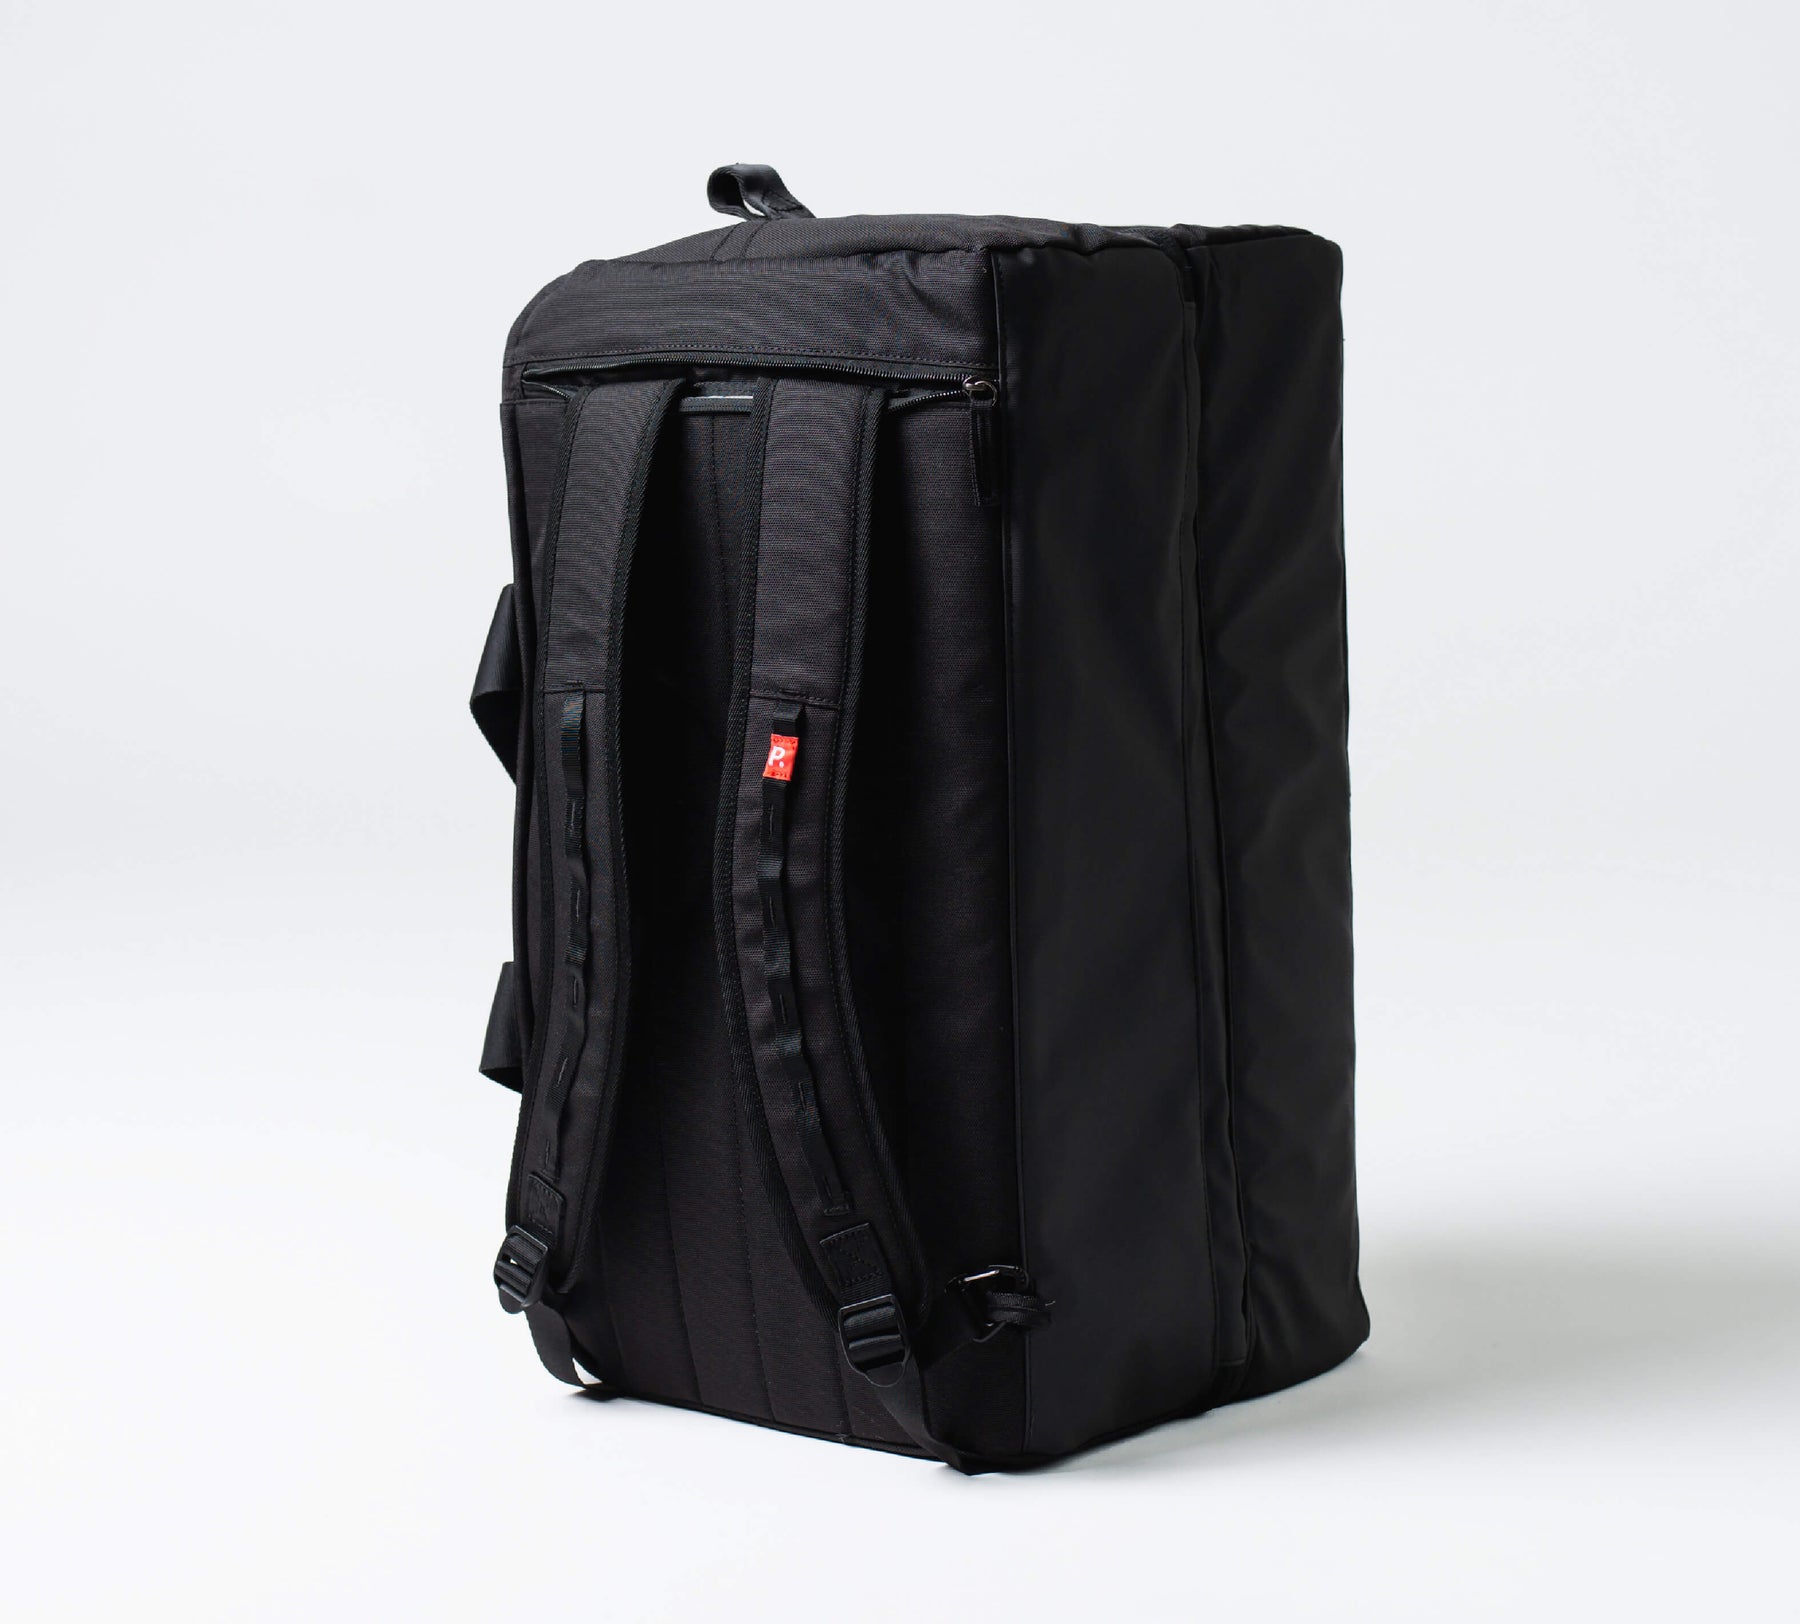 the 50L travel bag with removable backpack straps attached